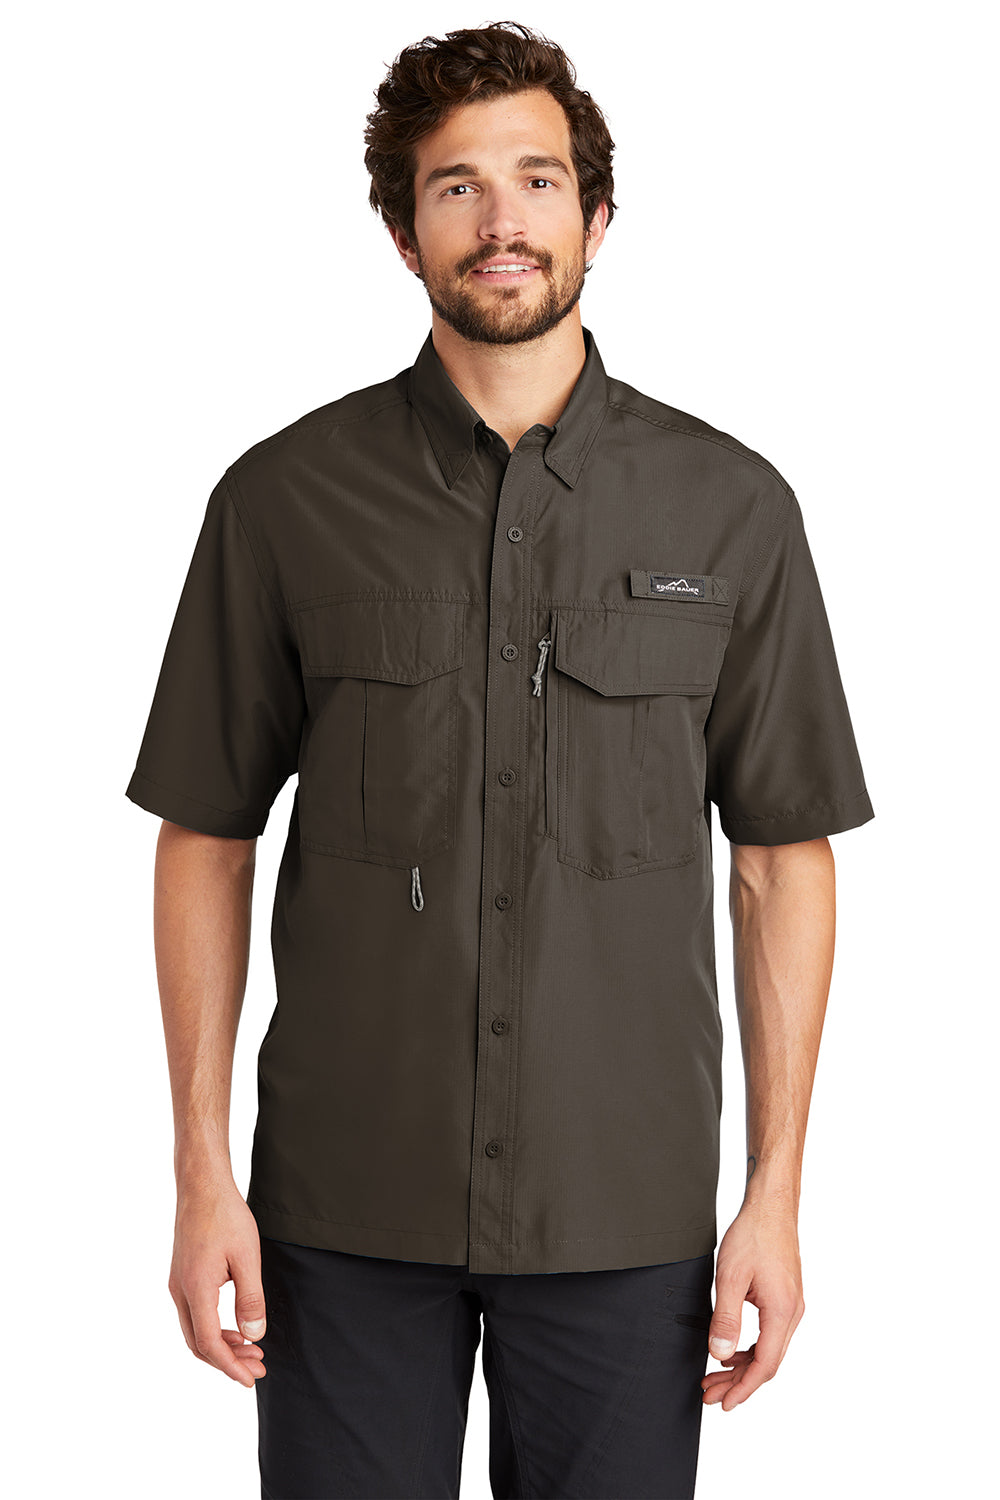 Eddie Bauer EB602 Mens Performance Fishing Moisture Wicking Short Sleeve Button Down Shirt w/ Double Pockets Boulder Model Front